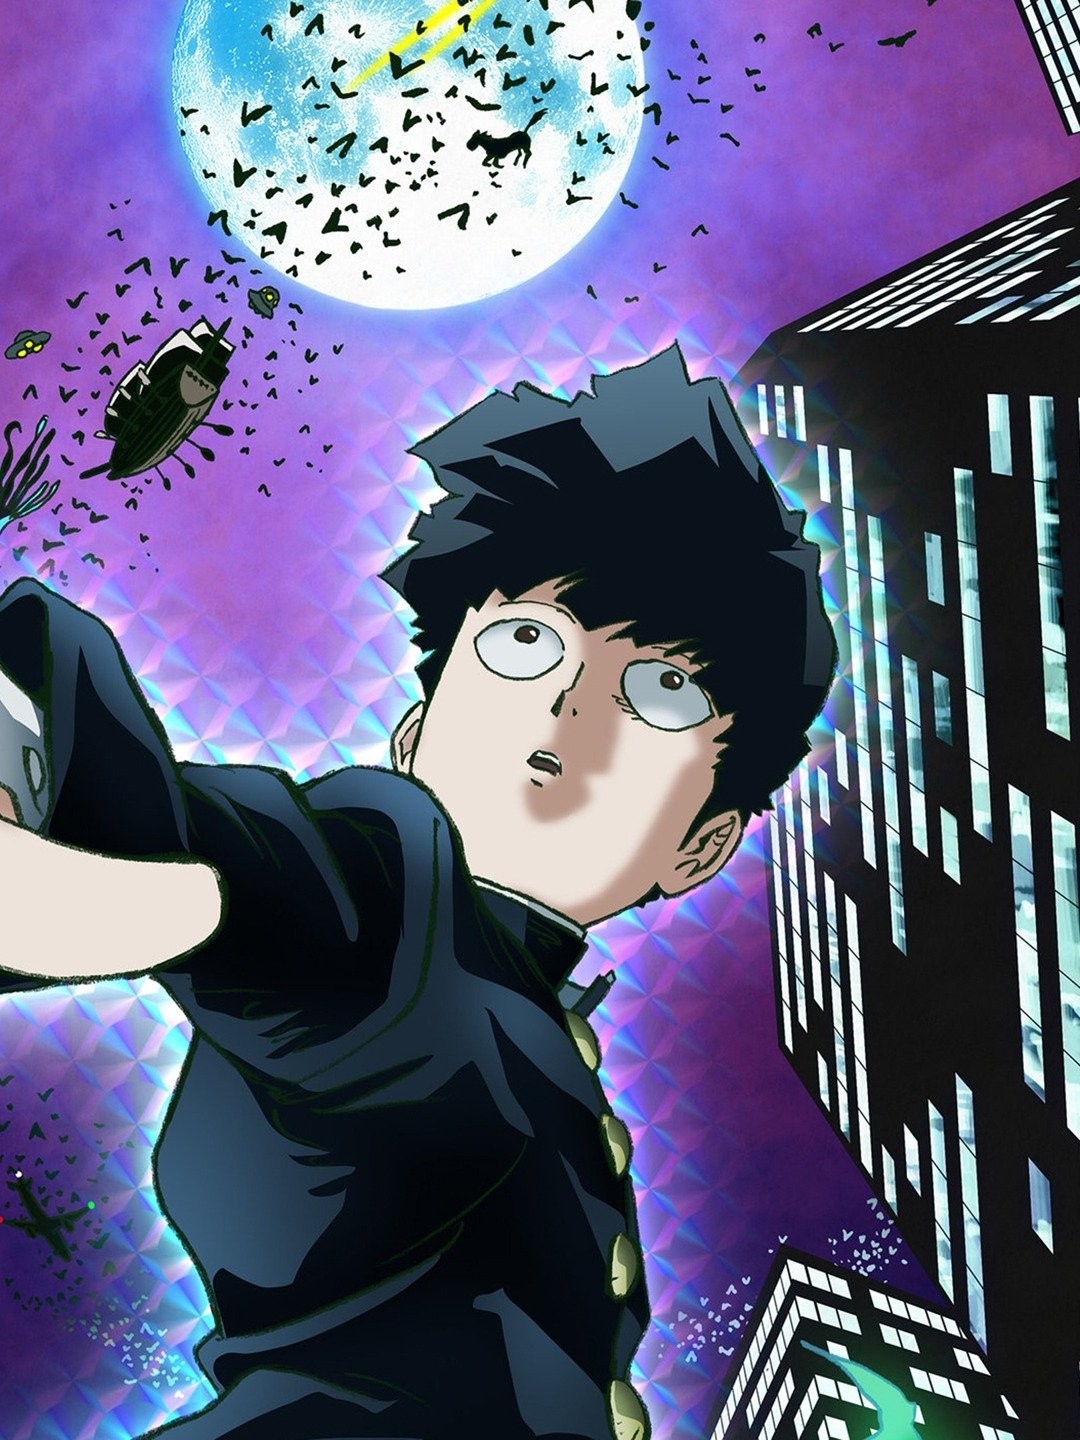 Mob Psycho Season 3 Episode 9 Release Date & Time